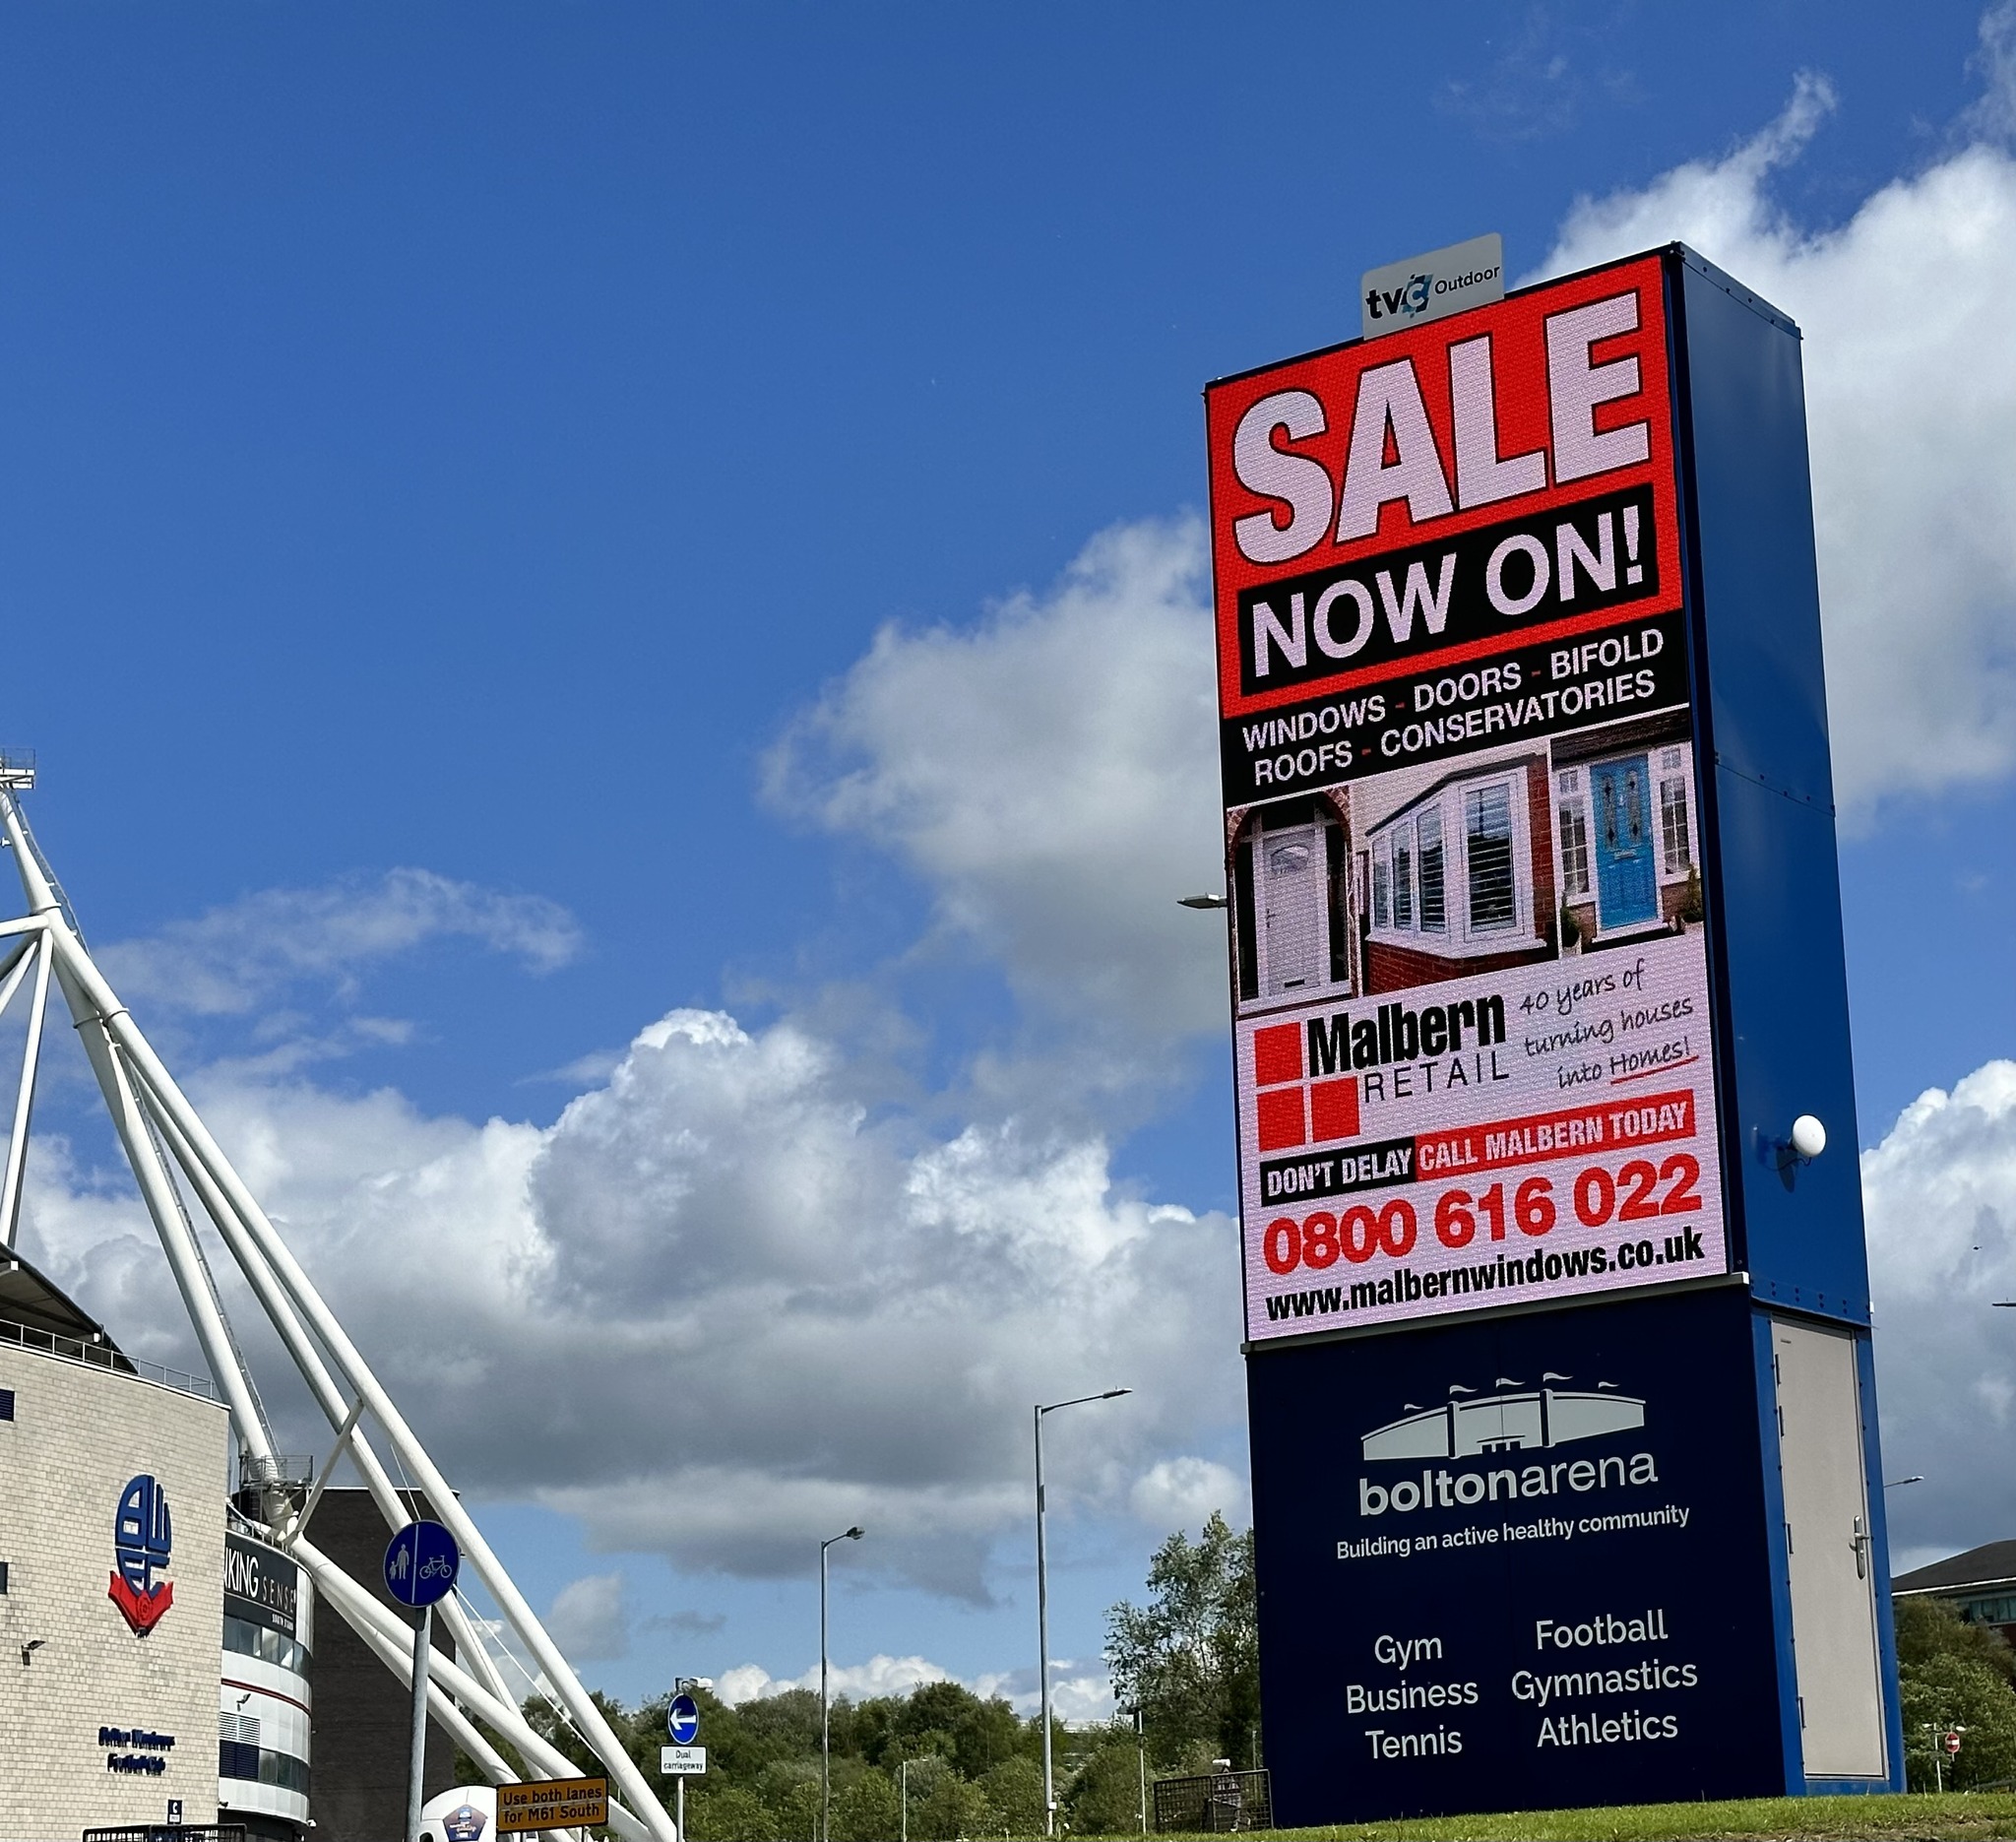 Take advantage of our exclusive offer to promote your business to a vast audience at the popular Middlebrook retail park, Bolton Arena, and Bolton Wanderers!